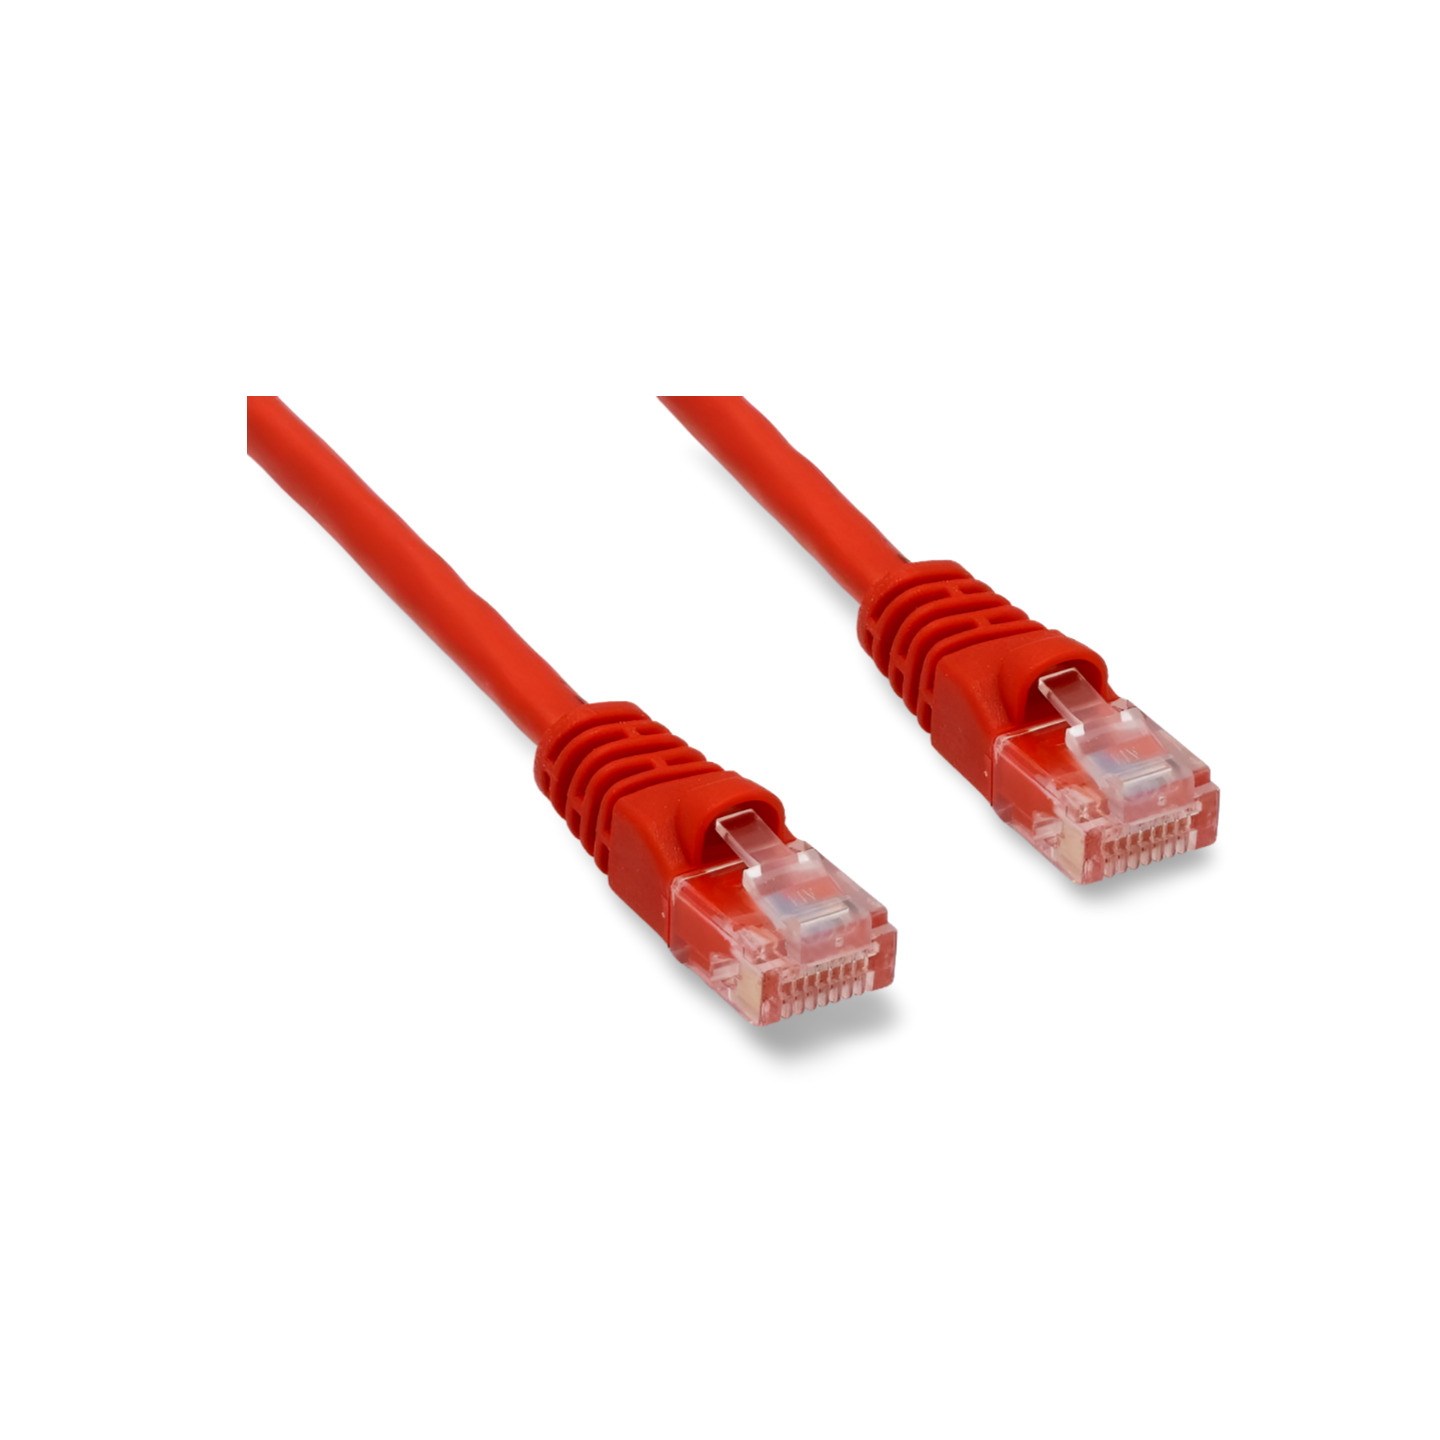 7ft Cat6 Ethernet Gigabit Crossover Network Cable RJ45 4 Pair - Red